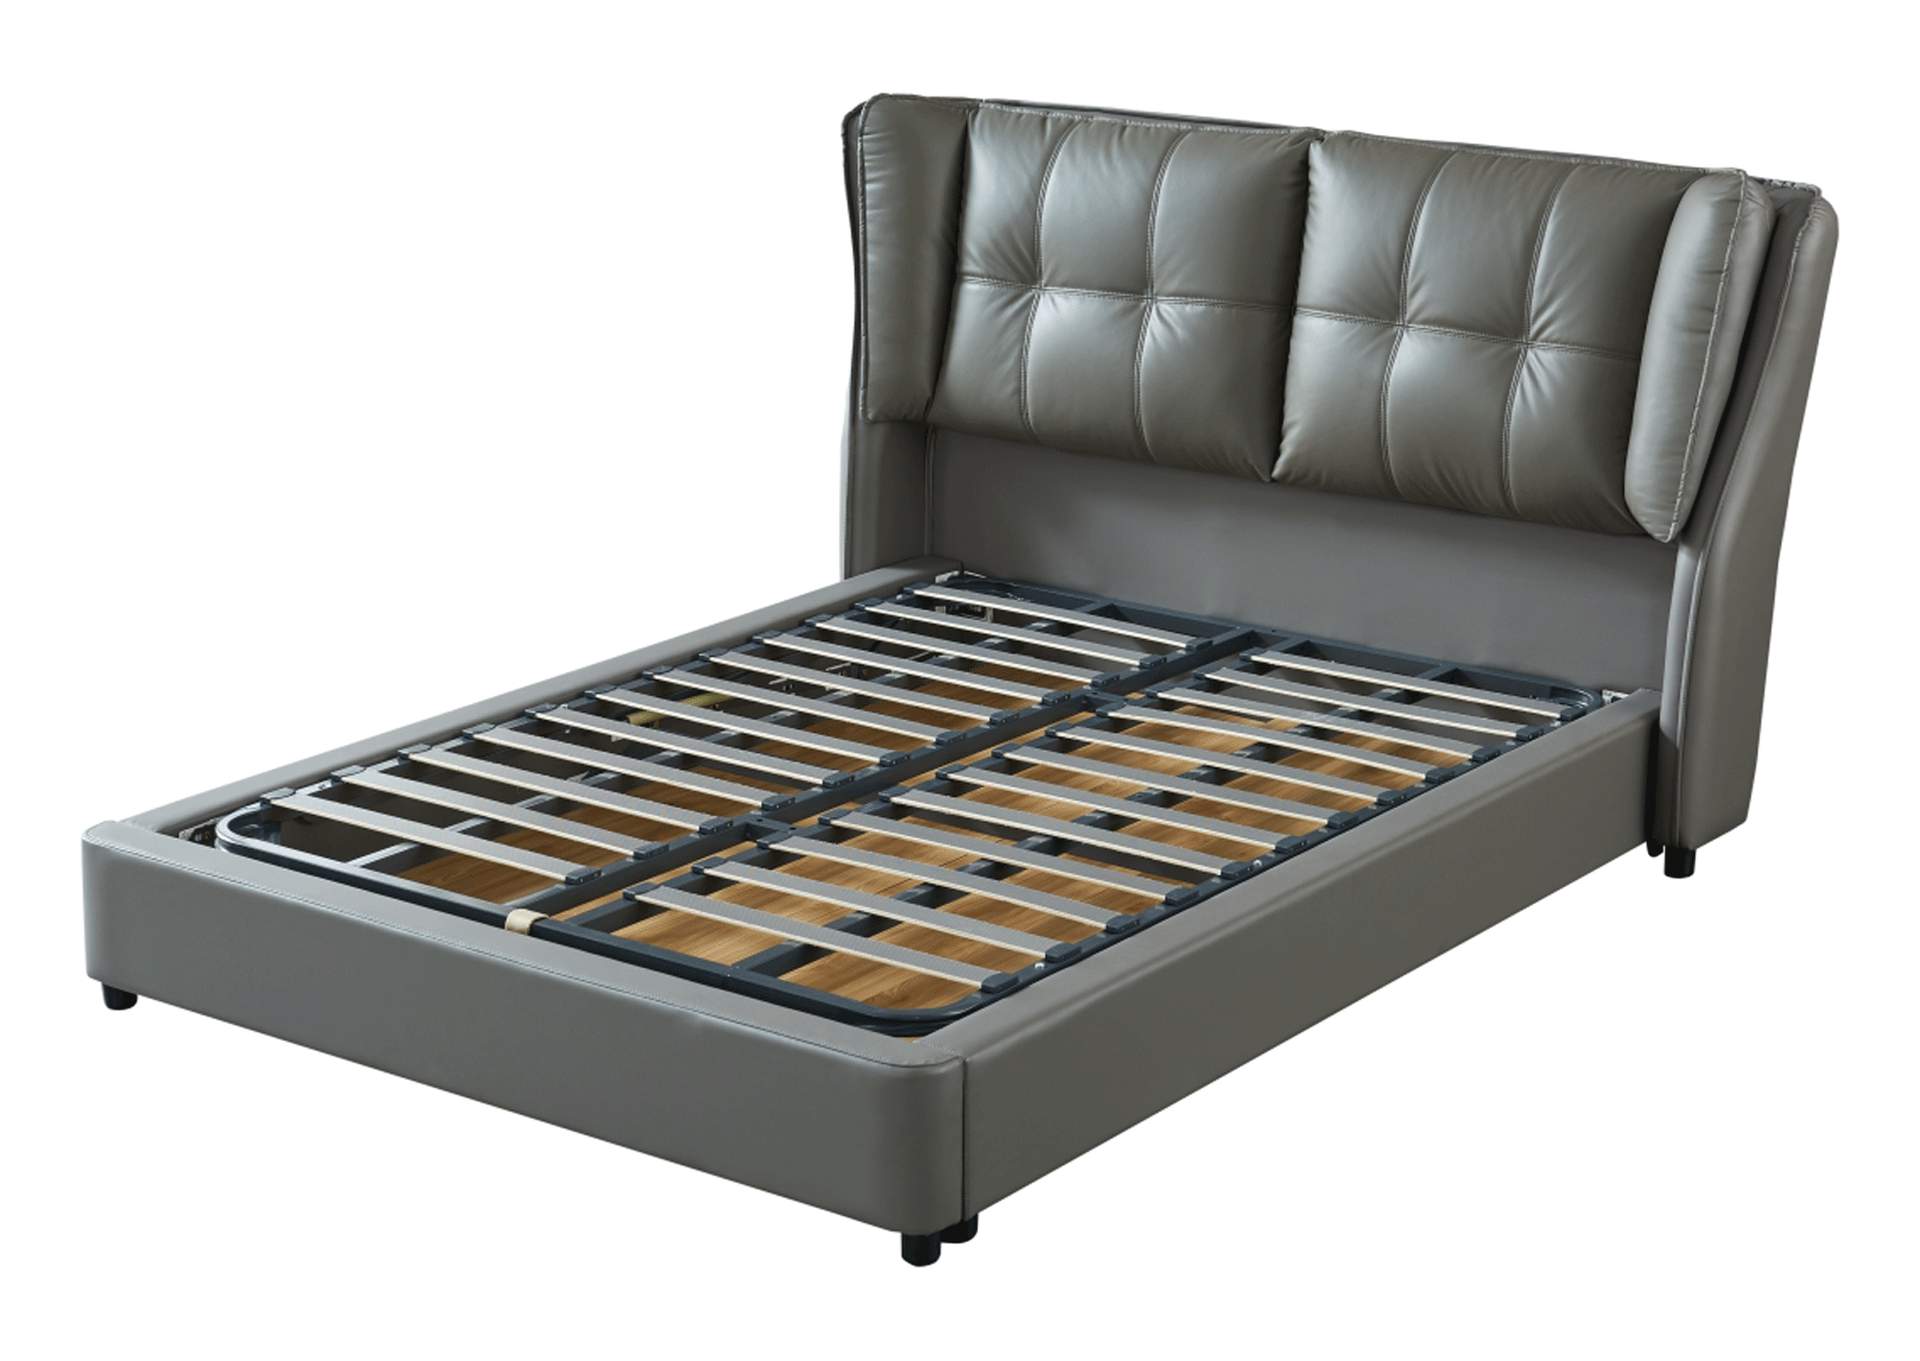 1806 Full Bed with Storage,ESF Wholesale Furniture